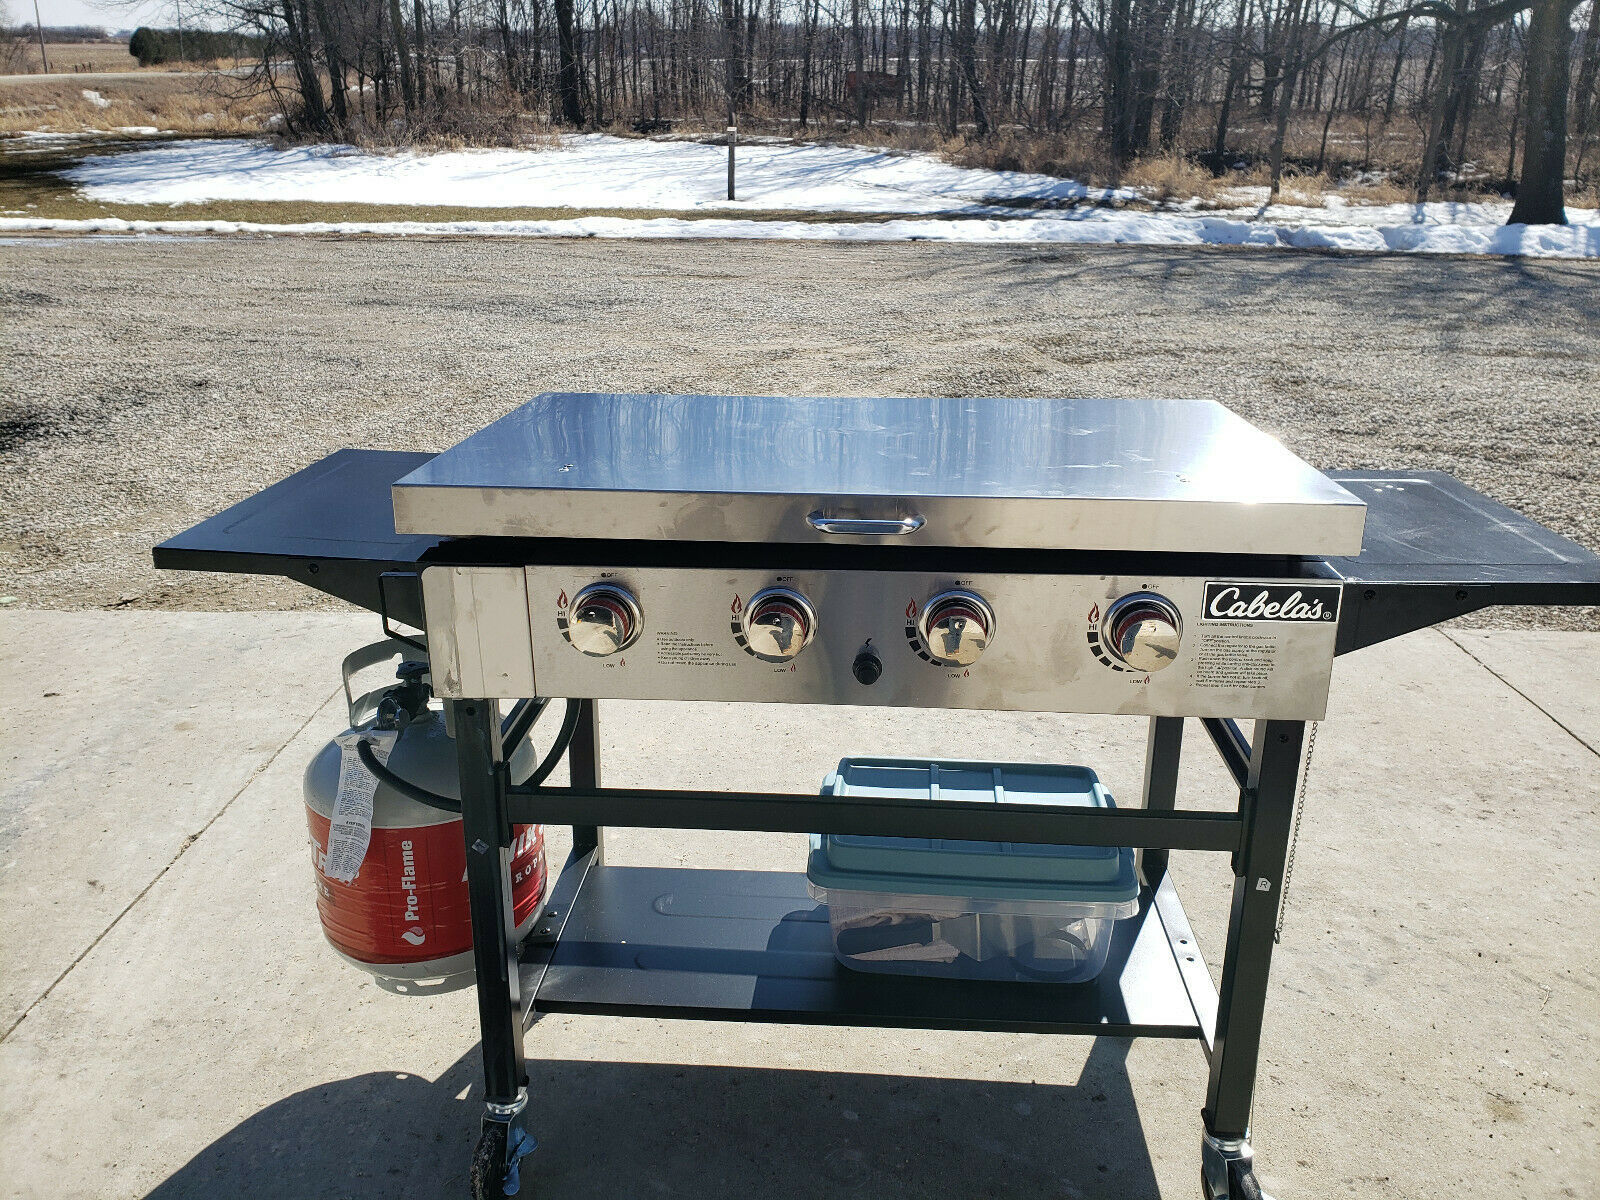 Stainless Griddle cover for Cabela's griddle - $137.50